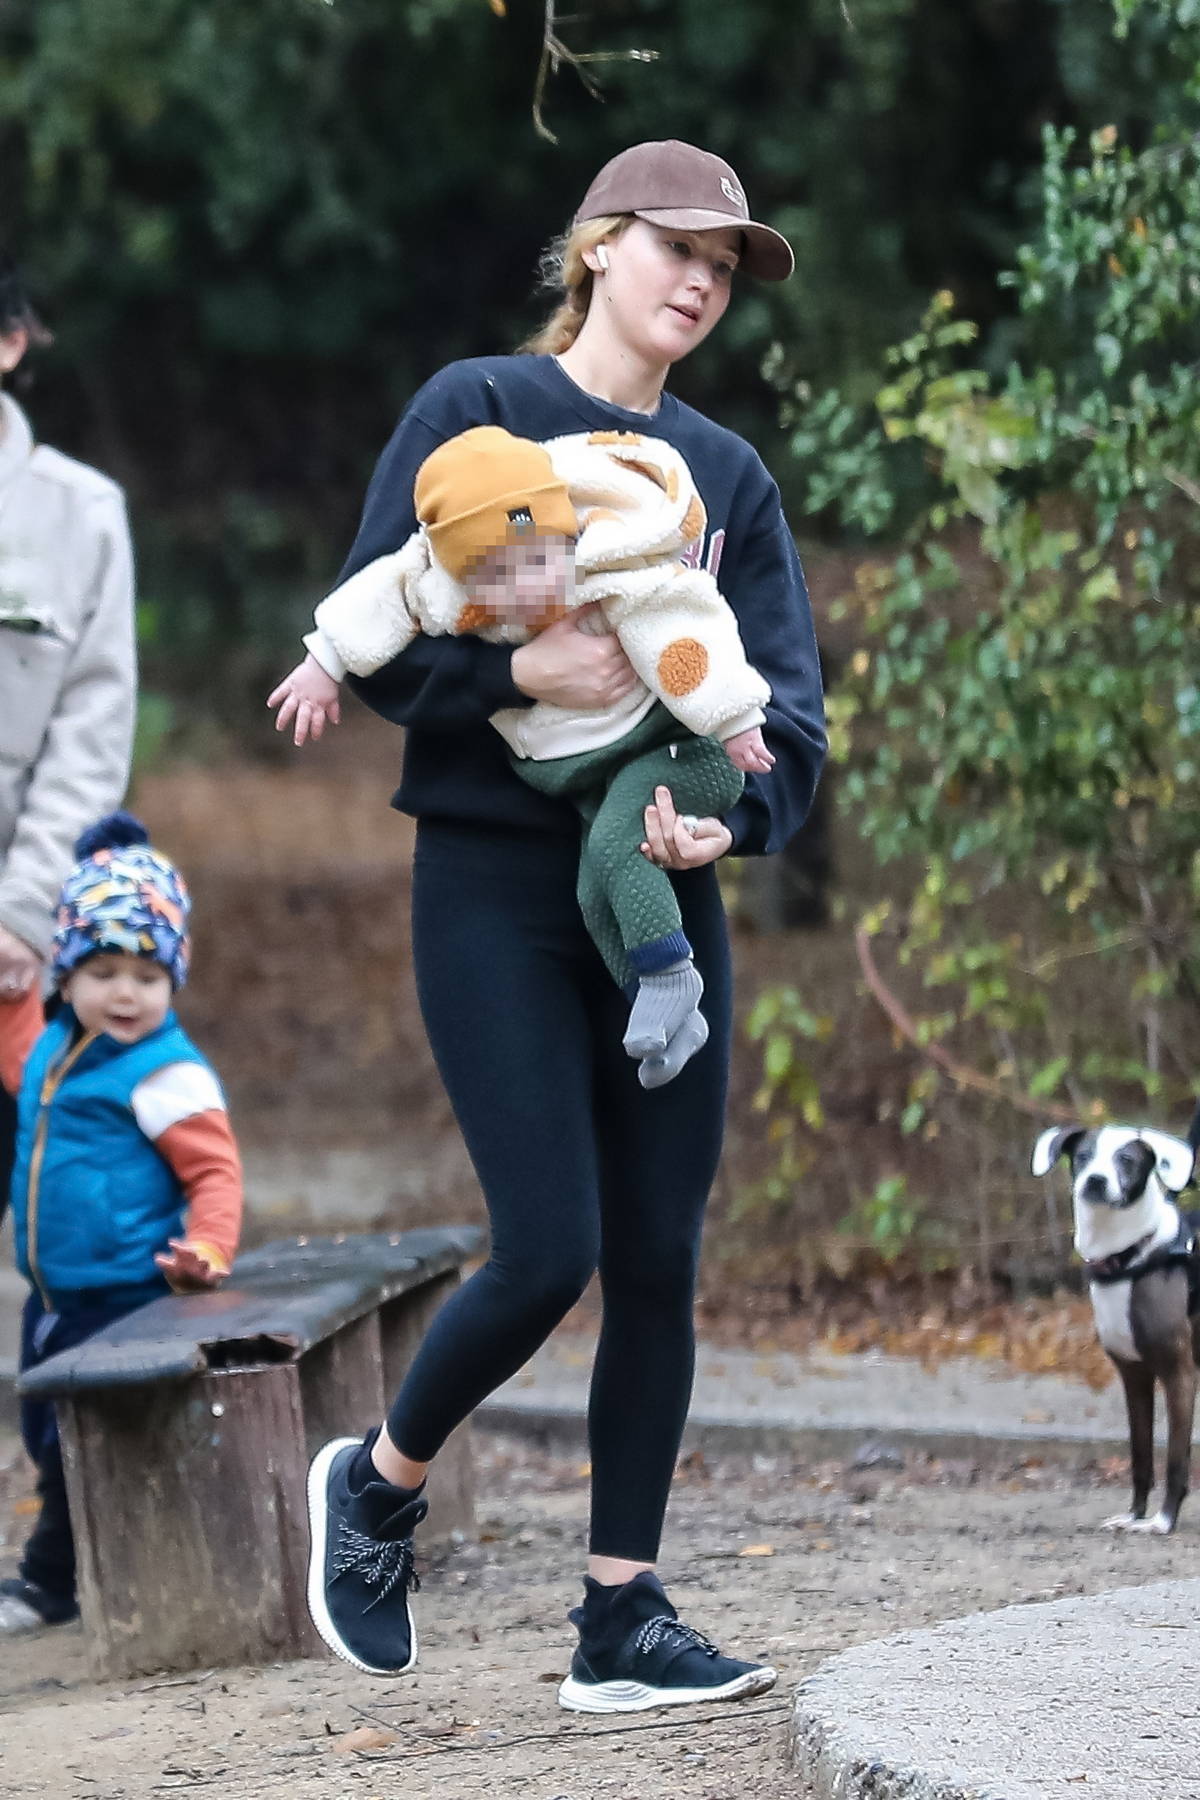 Jennifer Lawrence Keeps Warm In A Sweater Top And Leggings As She Takes Her Baby Boy Out On A Stroll At A Park In Los Angeles 020123 11 